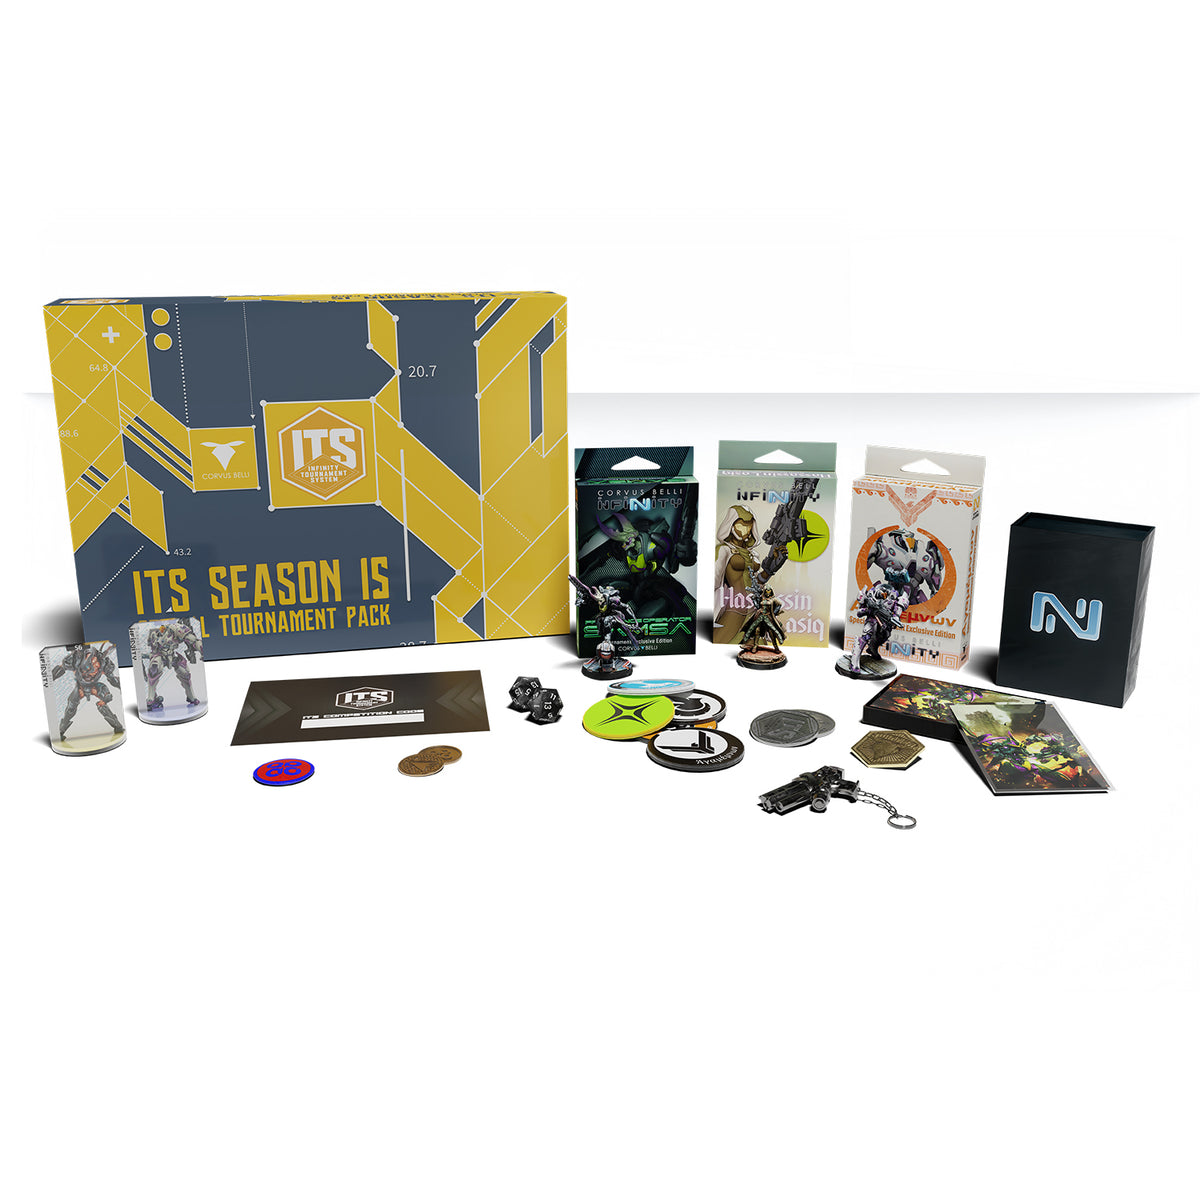 ITS Season 15 Special Tournament Pack